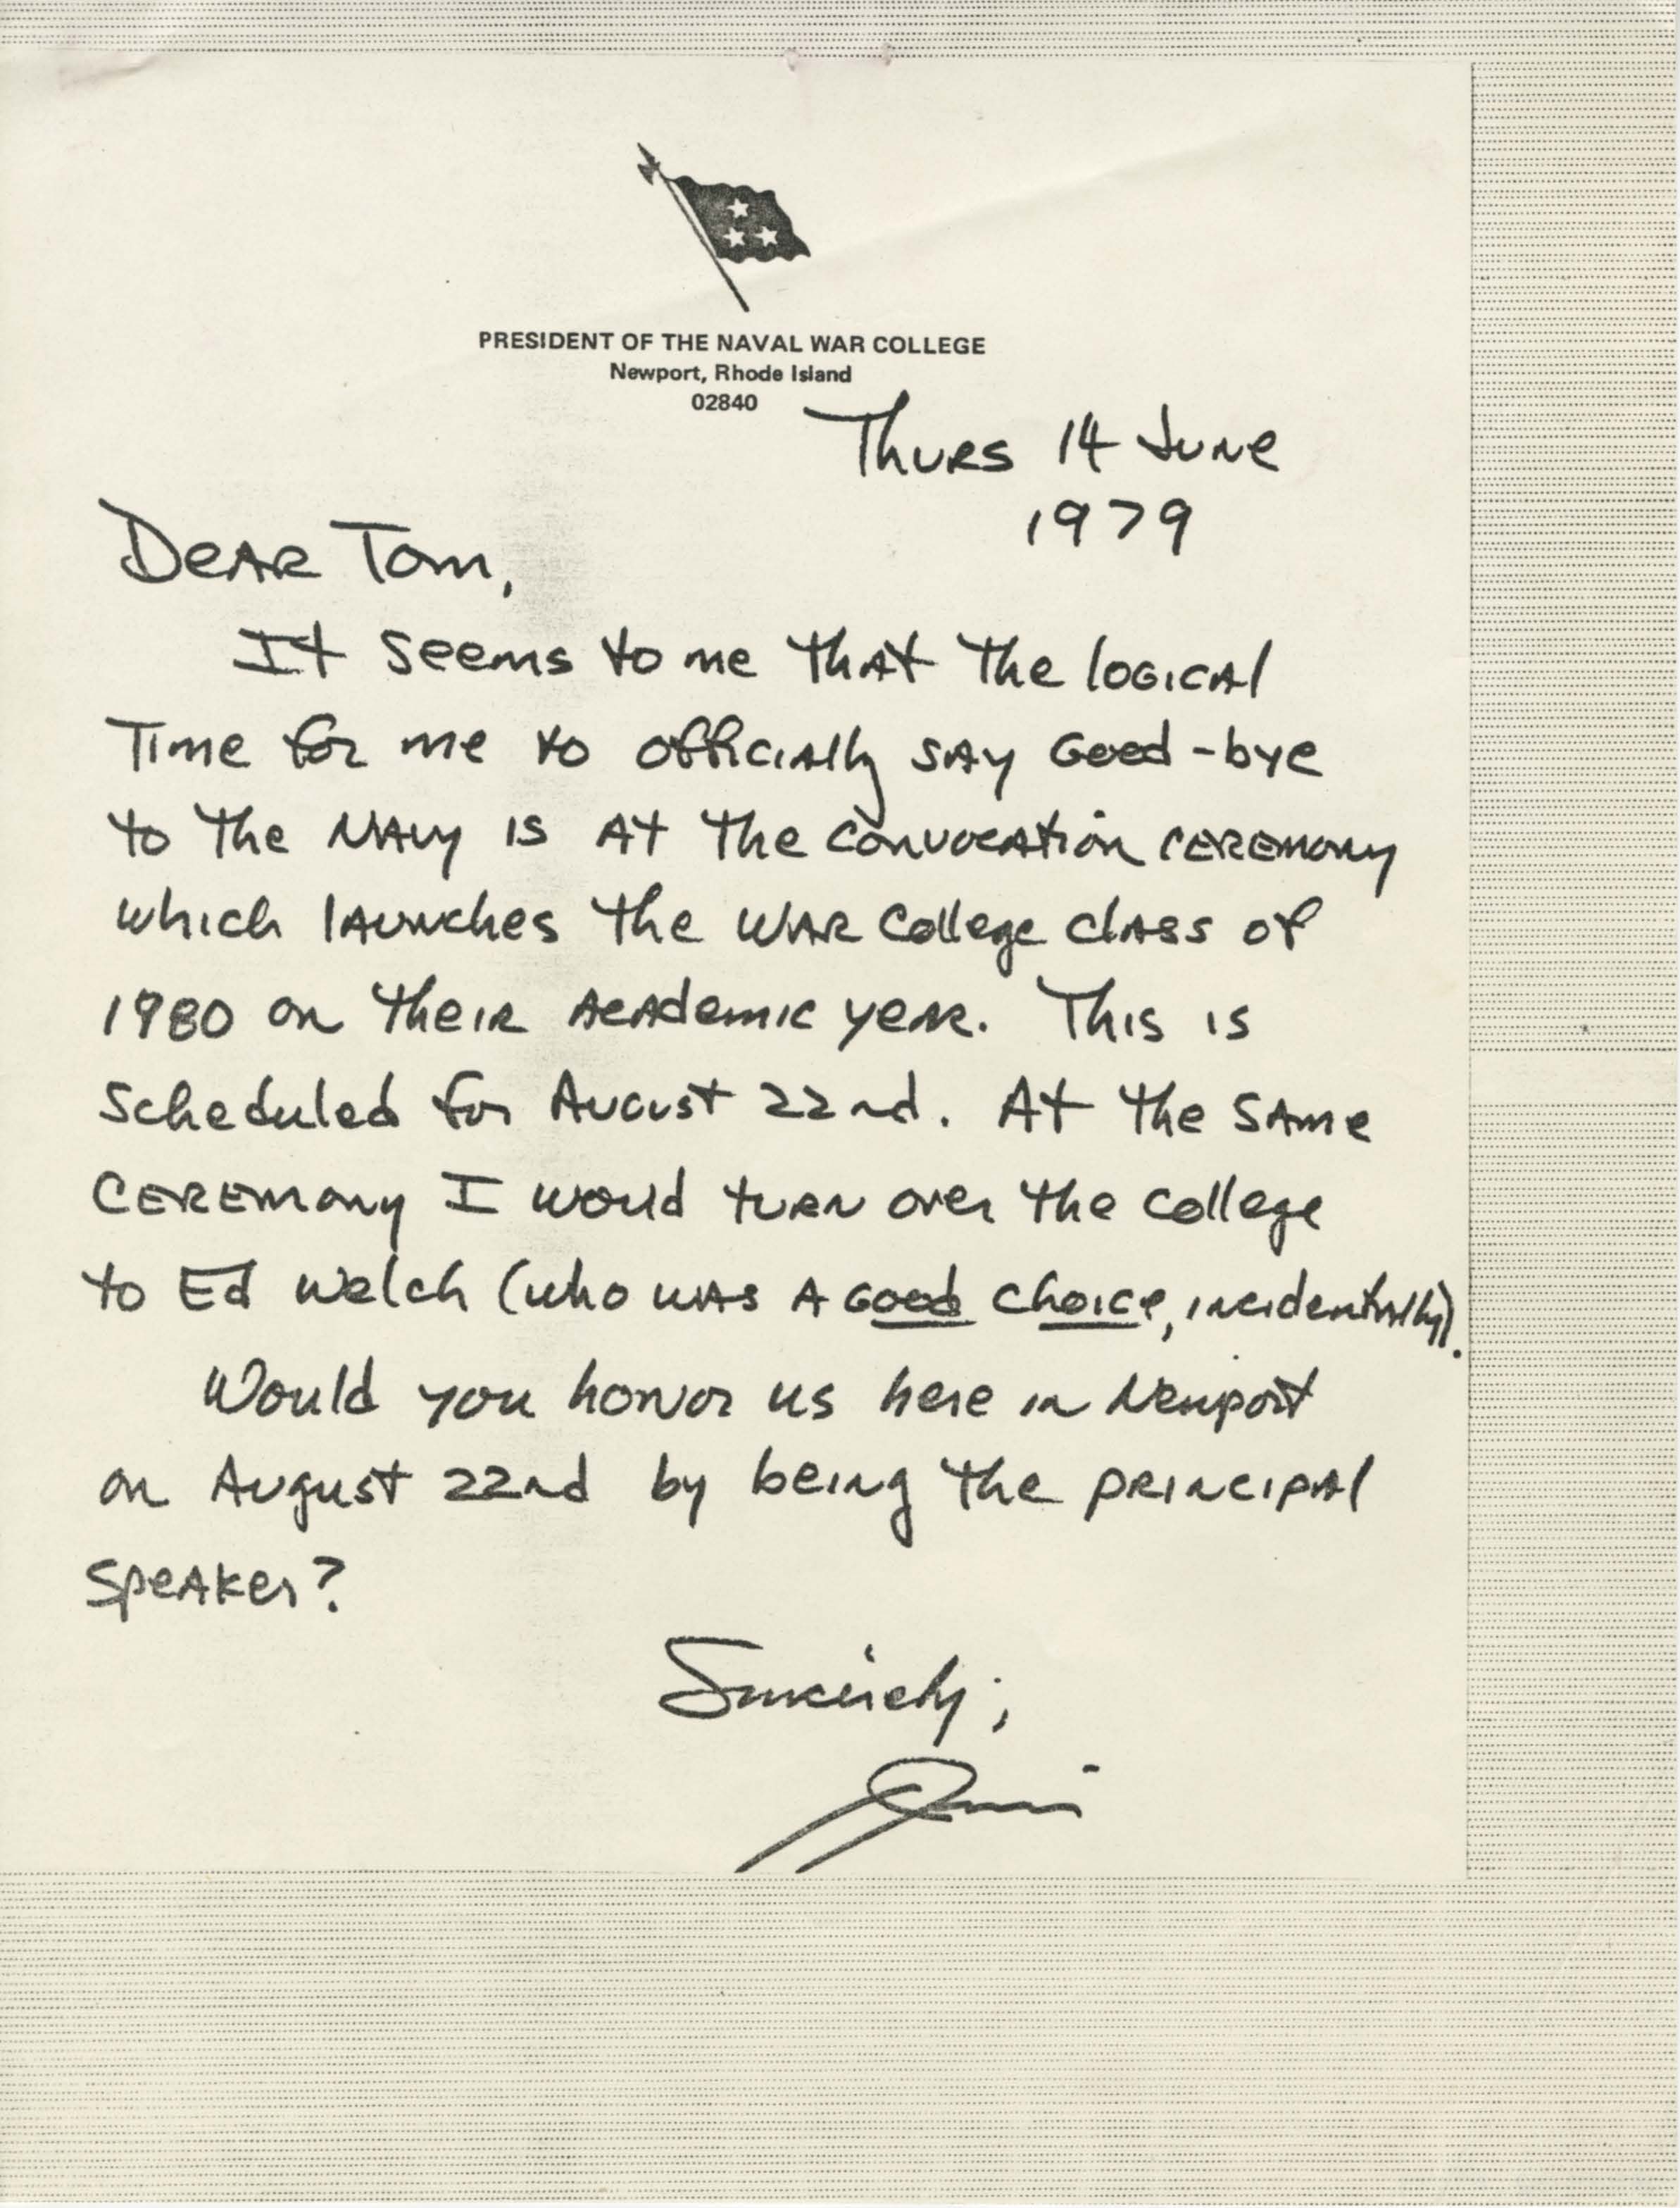 Letter from James B. Stockdale to Thomas B. Hayward